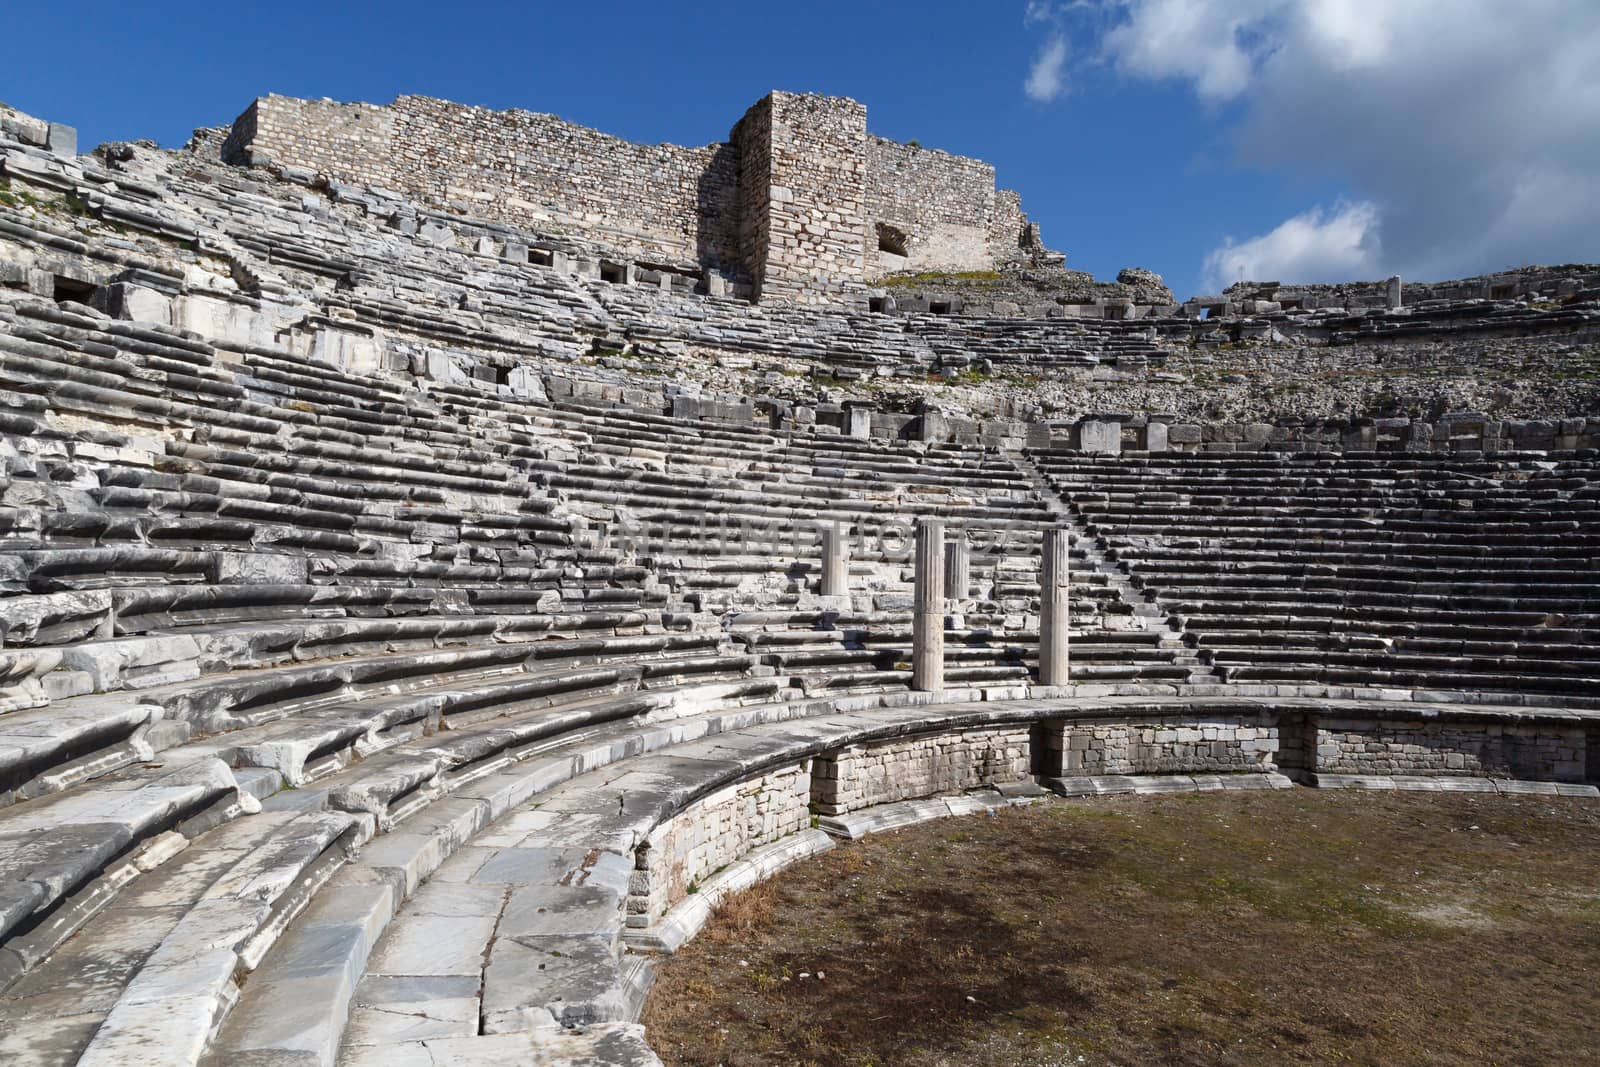 View of Miletus amphitheater in Aydin, Turkey with stone stairs on bright blue sky background.